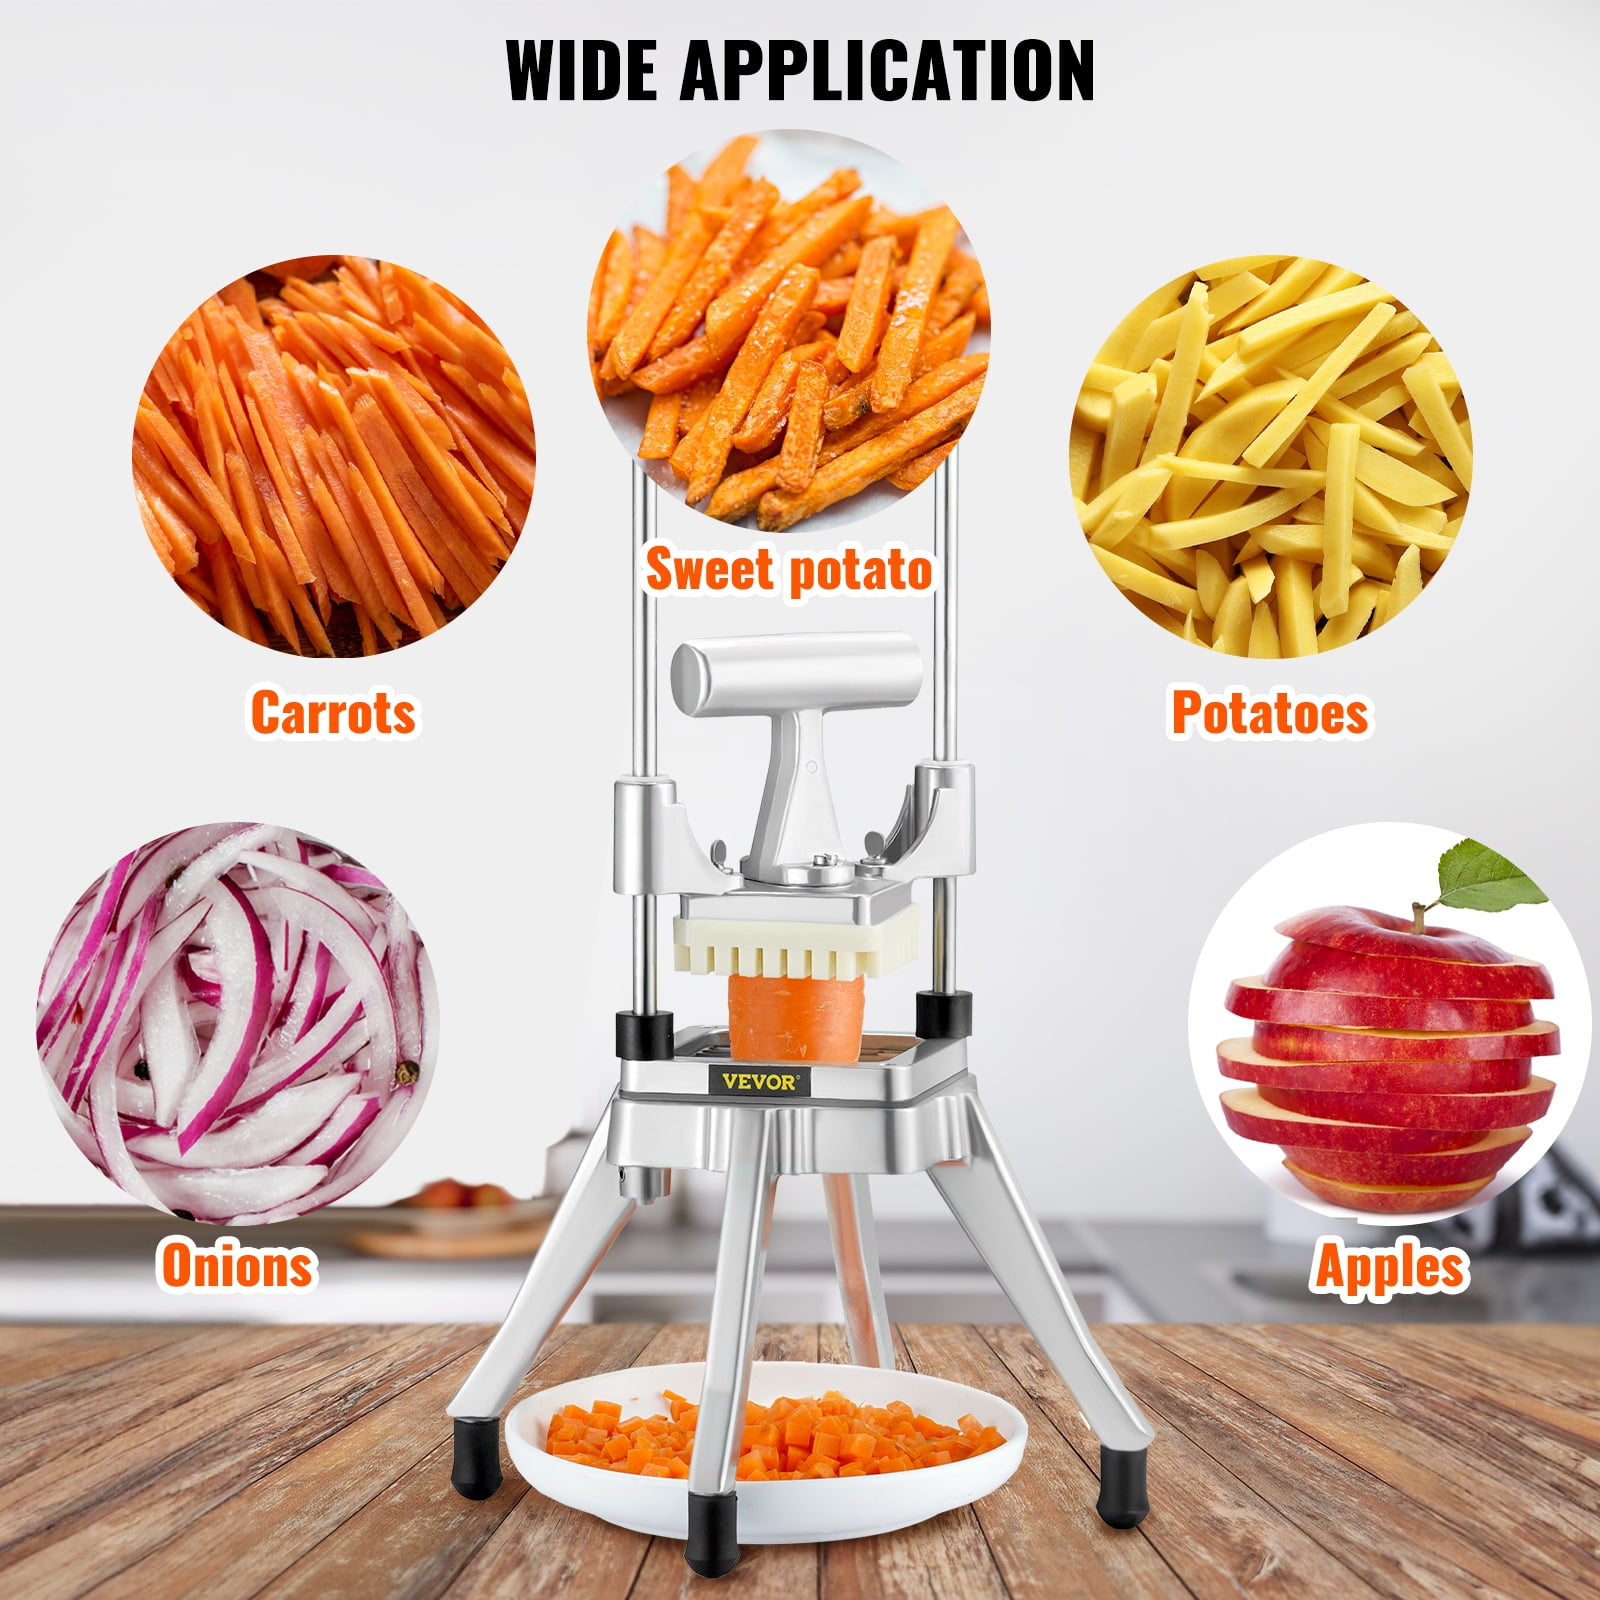 Happybuy Commercial Vegetable Fruit Chopper 3/8′′ Blade Professional Food Dicer Kattex French Fry Cutter Onion Slicer Stainless Steel for Tomato